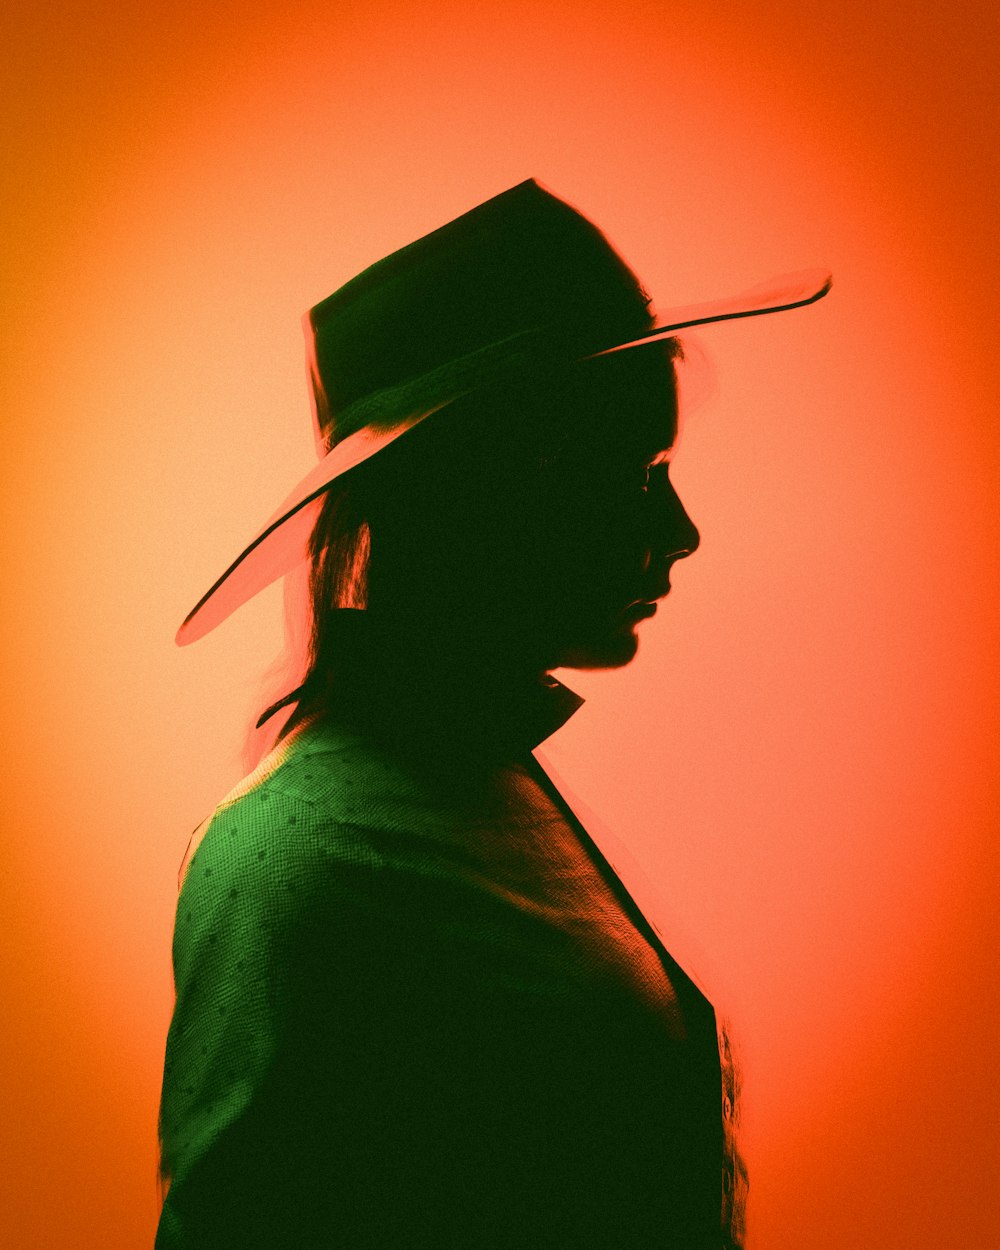 a silhouette of a man wearing a hat